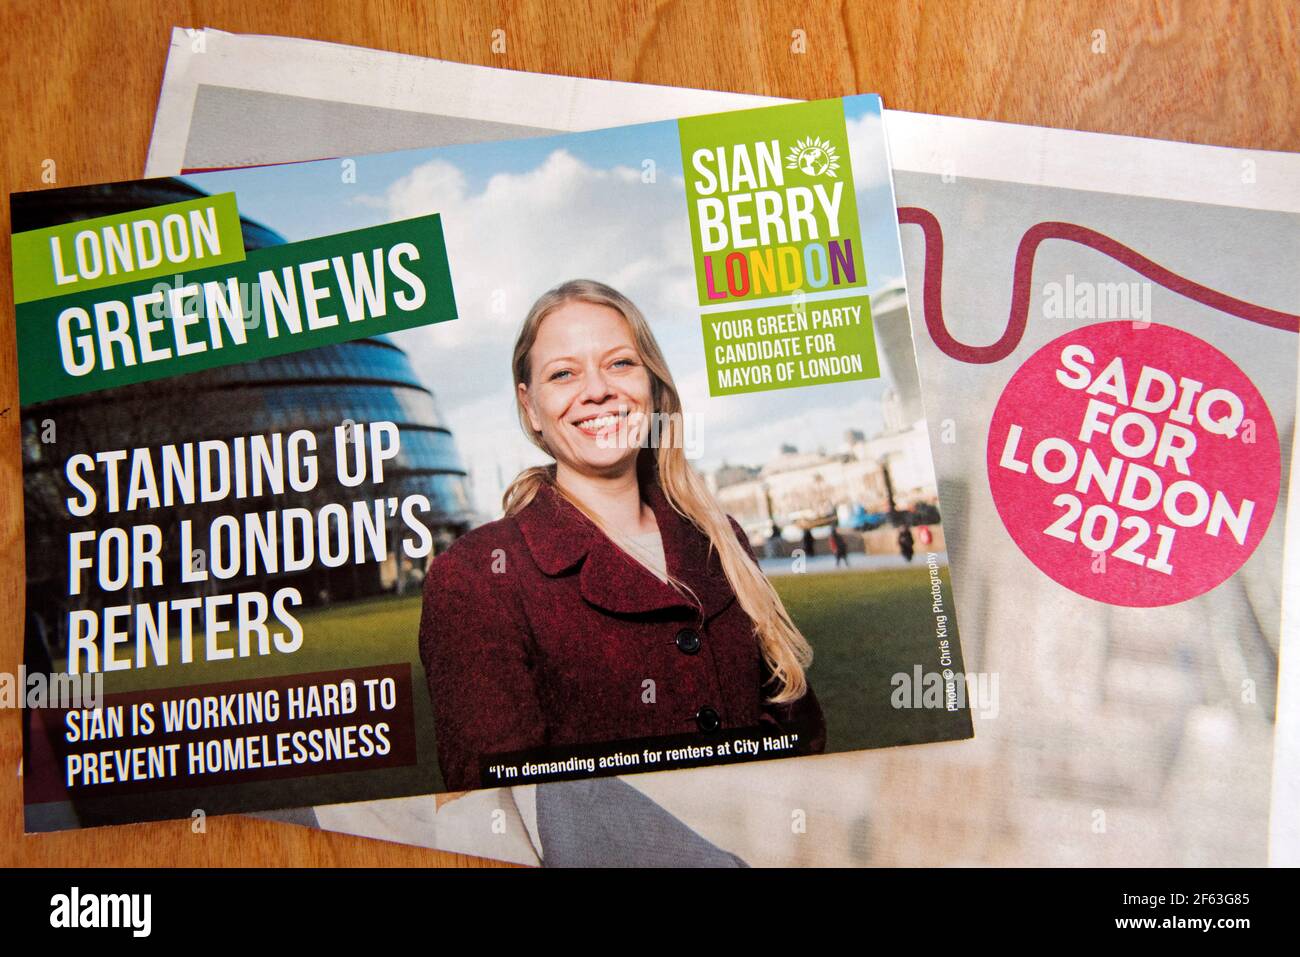 London Mayoral Election political leaflets, London Green News, Sian Berry Green Party candidate and Sadiq Khan Labour for Mayor of London in the UK 2021 Mayoral and Assemble elections Stock Photo